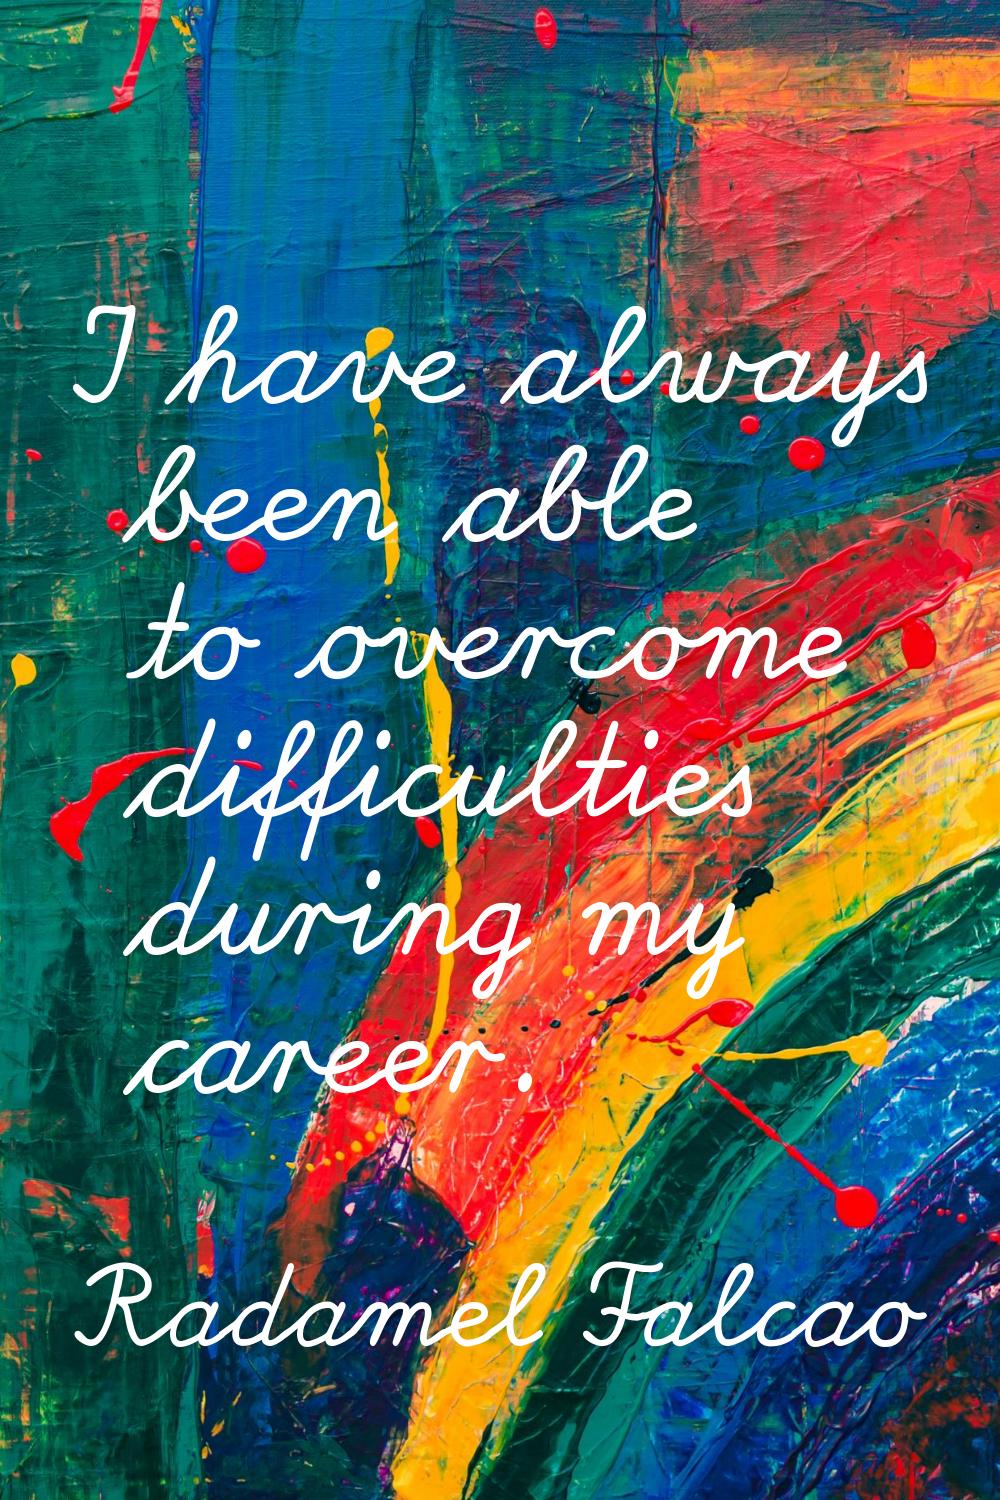 I have always been able to overcome difficulties during my career.